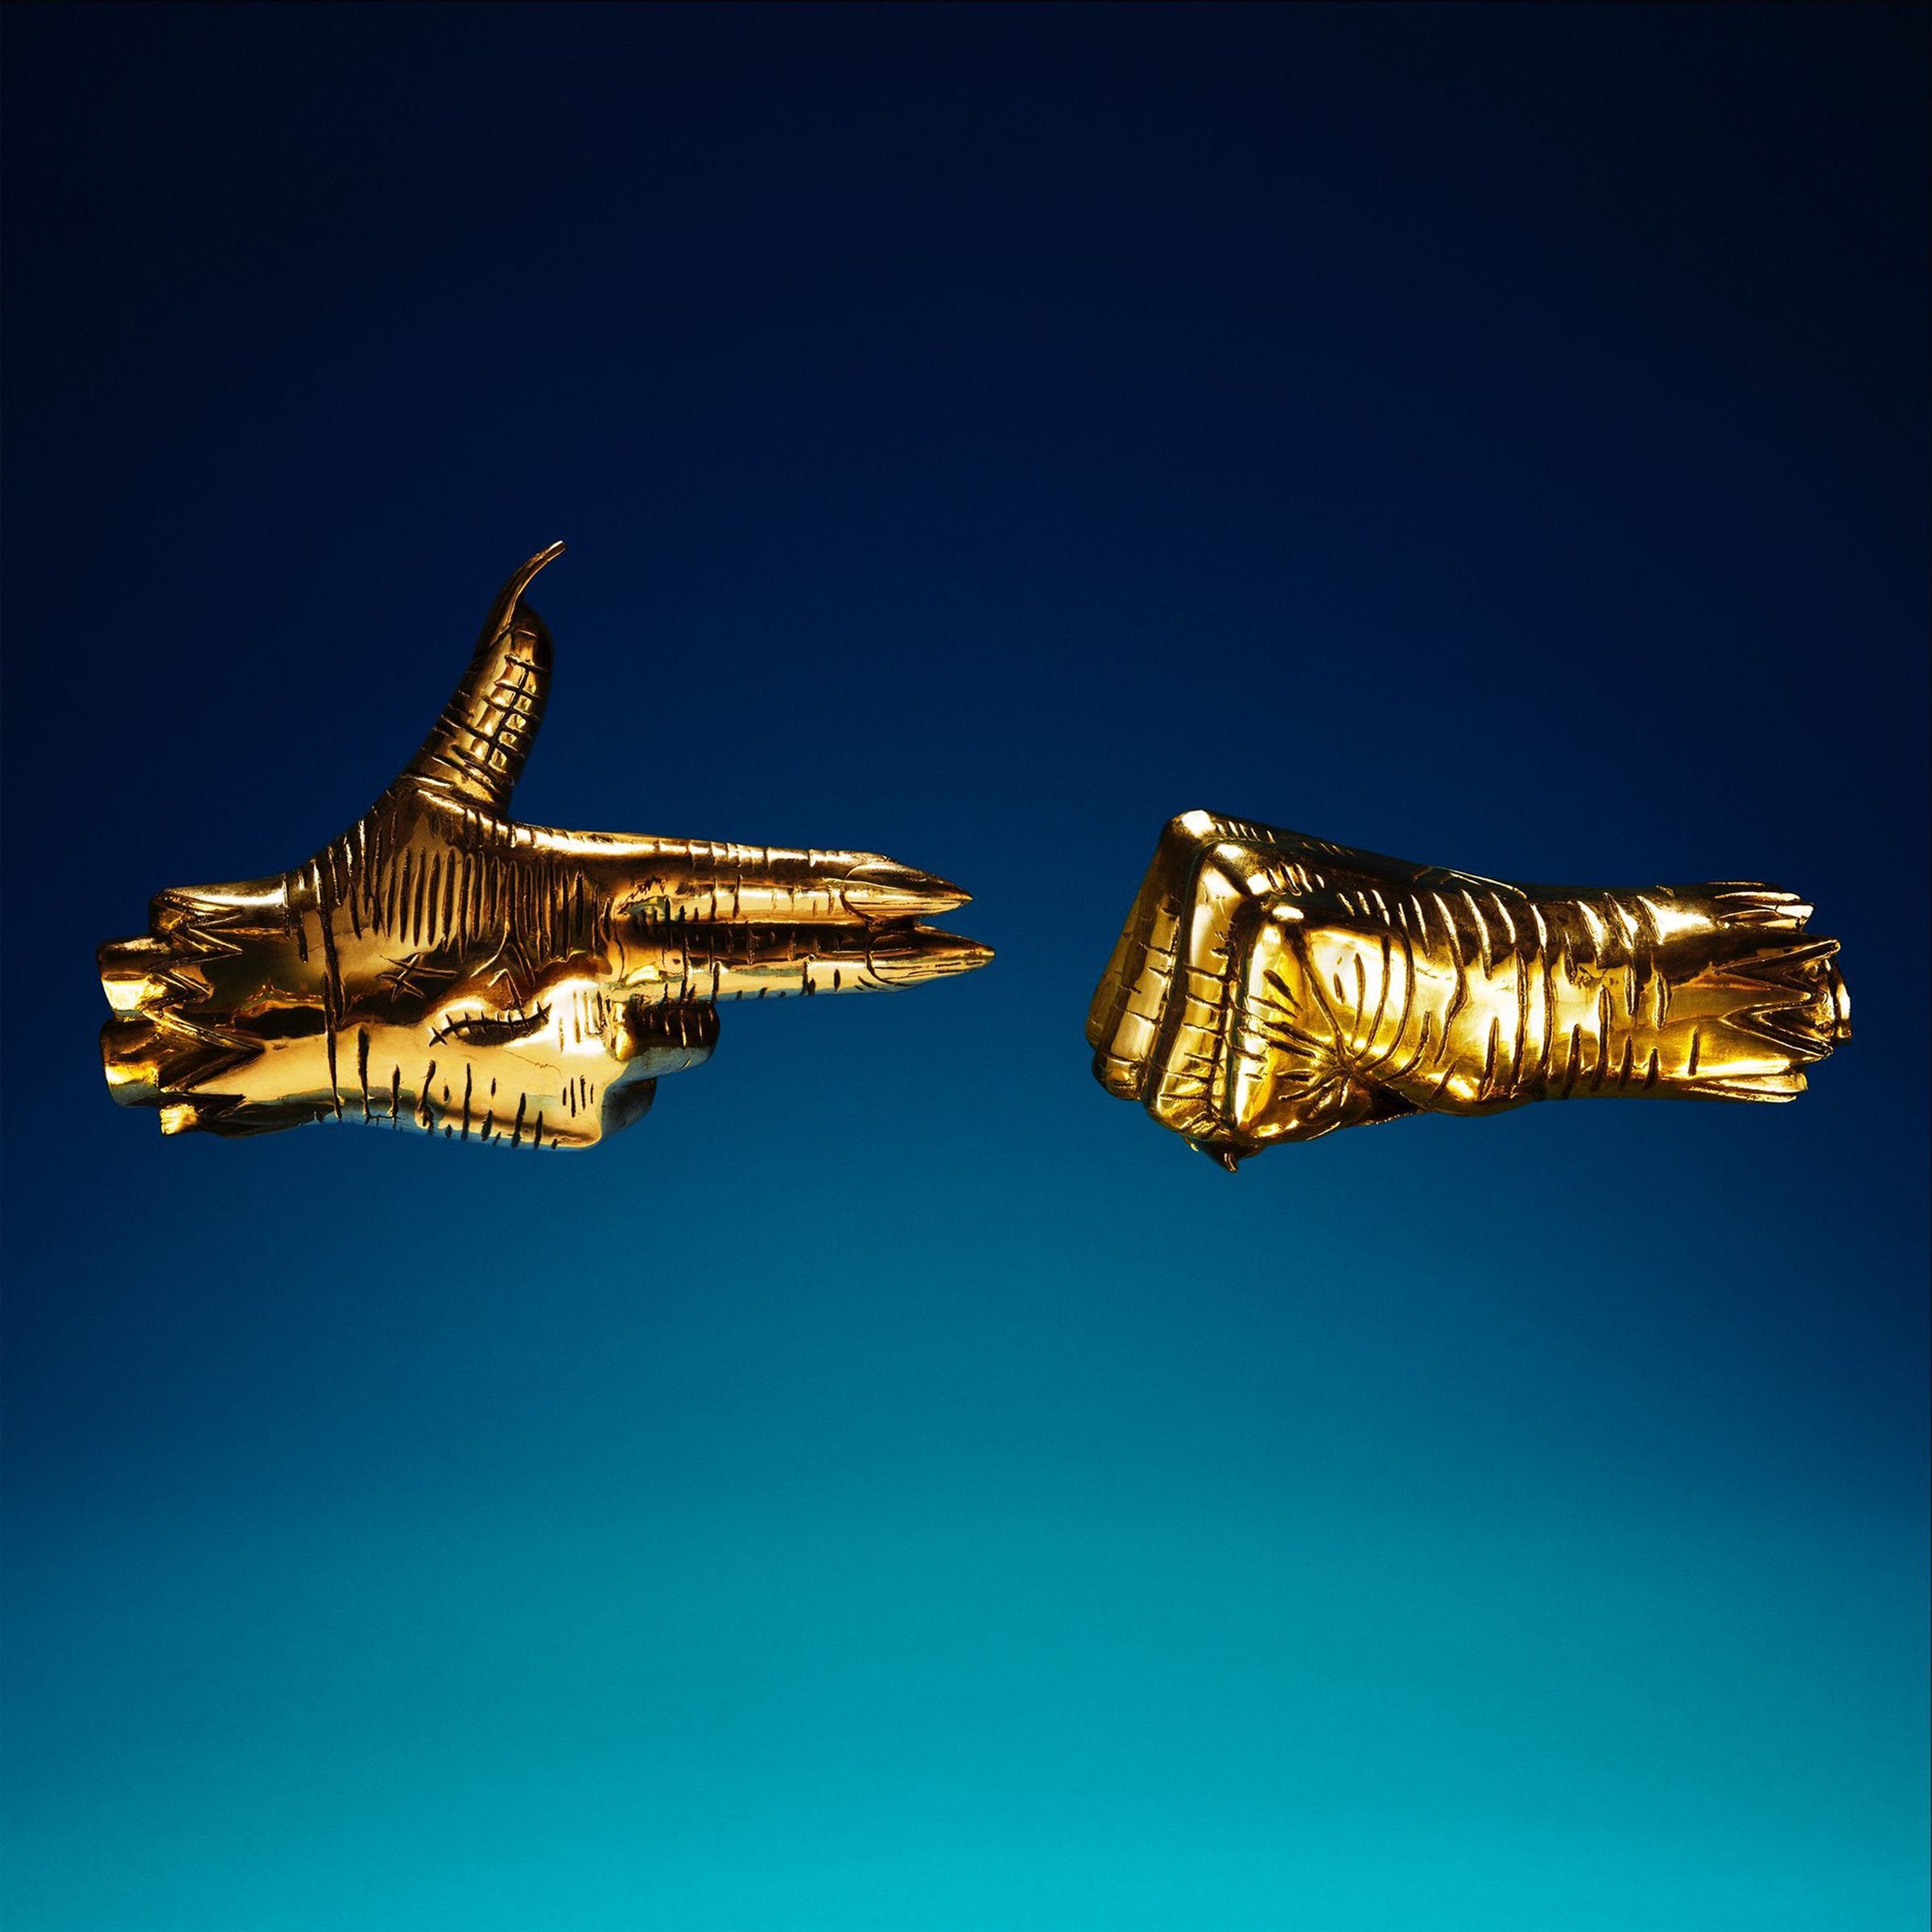 Cover artwork for Run The Jewels 3.